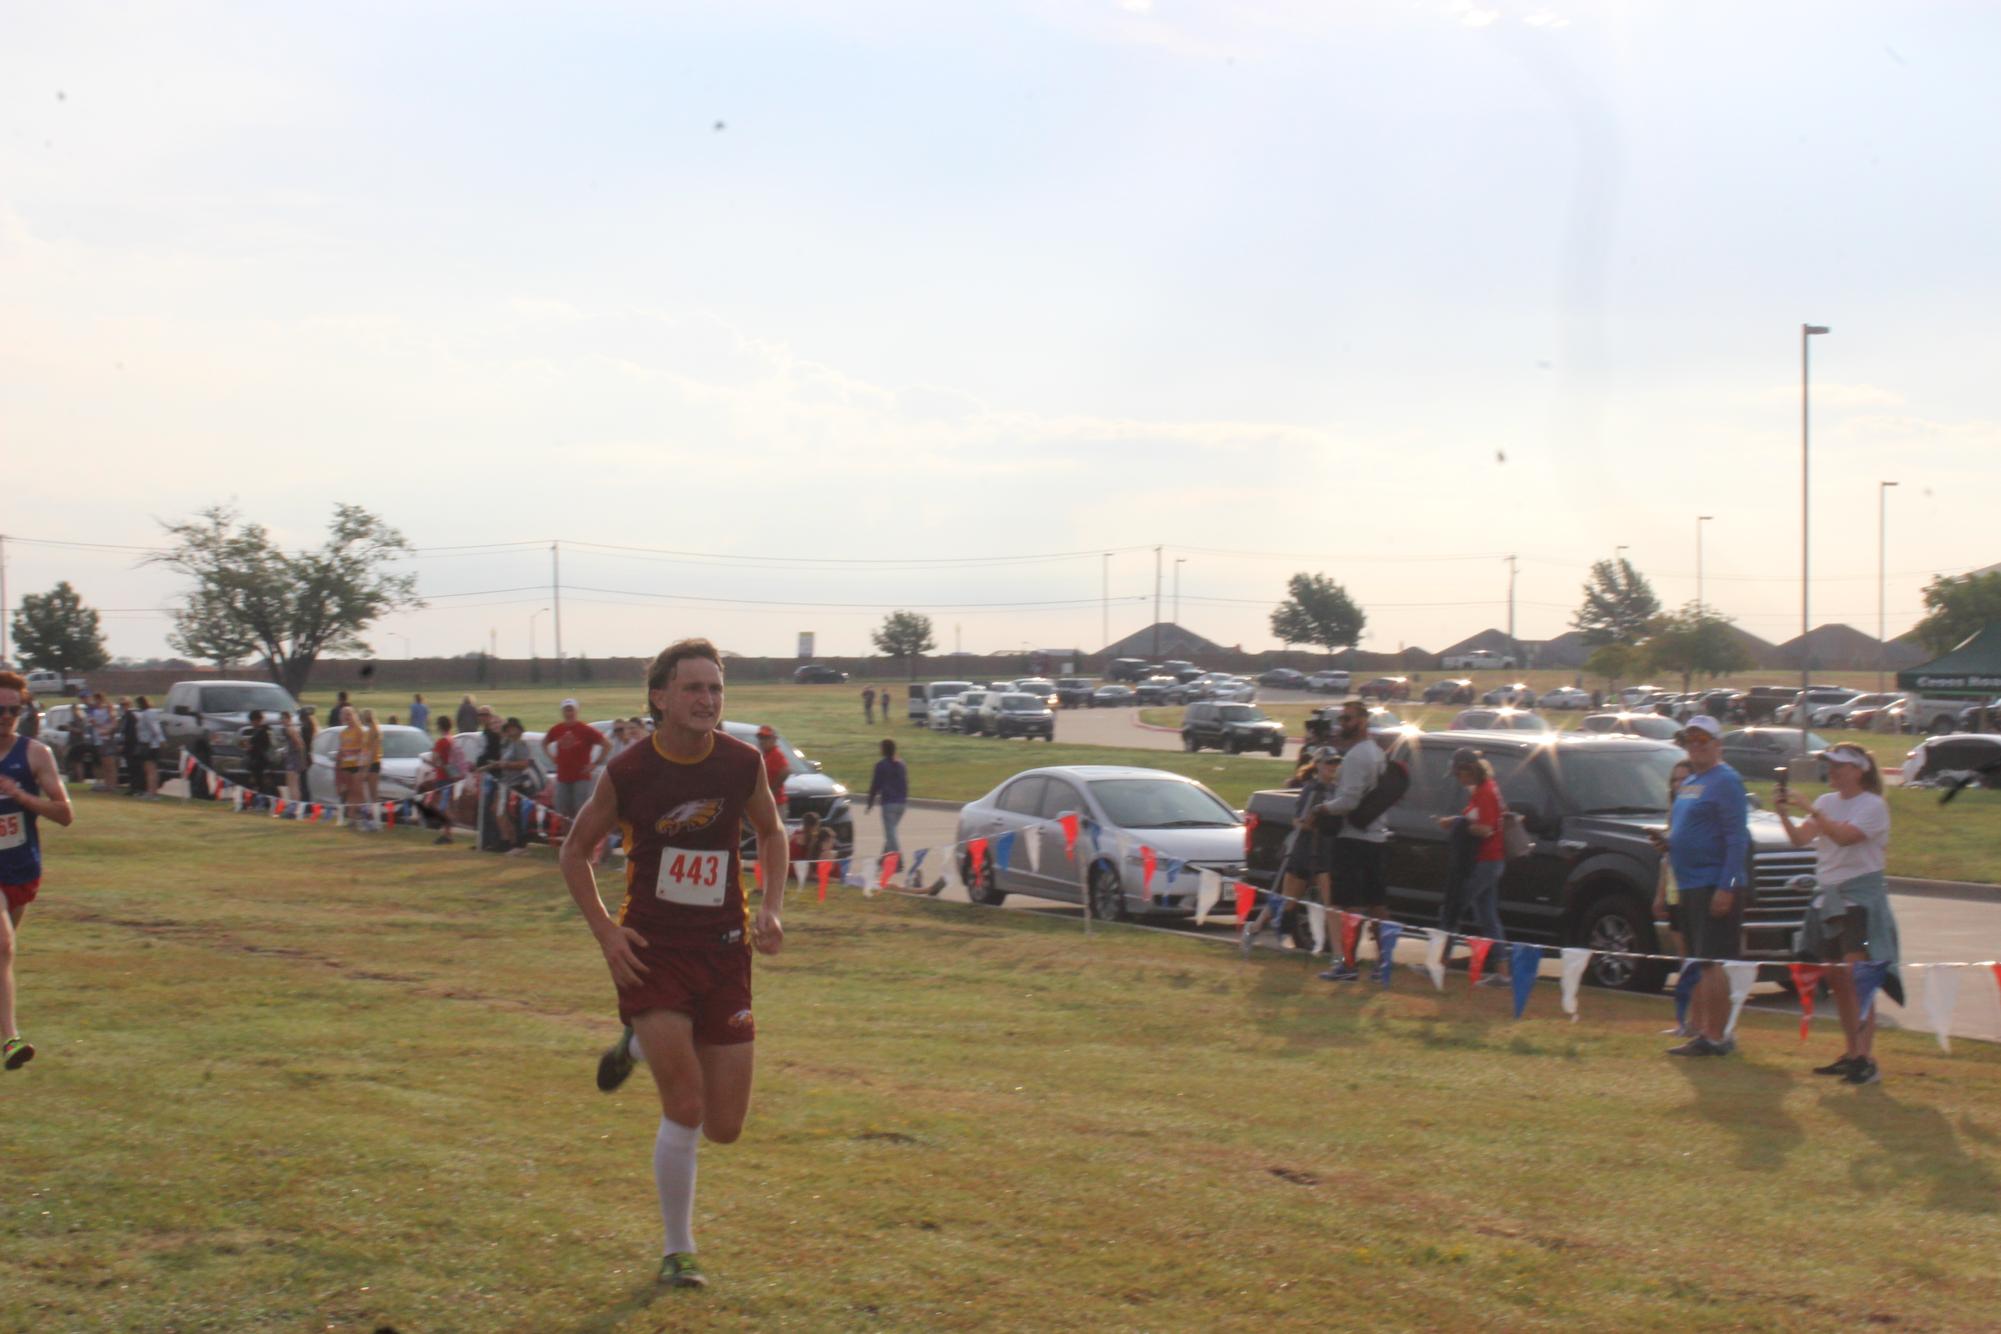 Junior Jerry Draper, 2022 cross country state competitor, finishes the course at the Ennis meet.